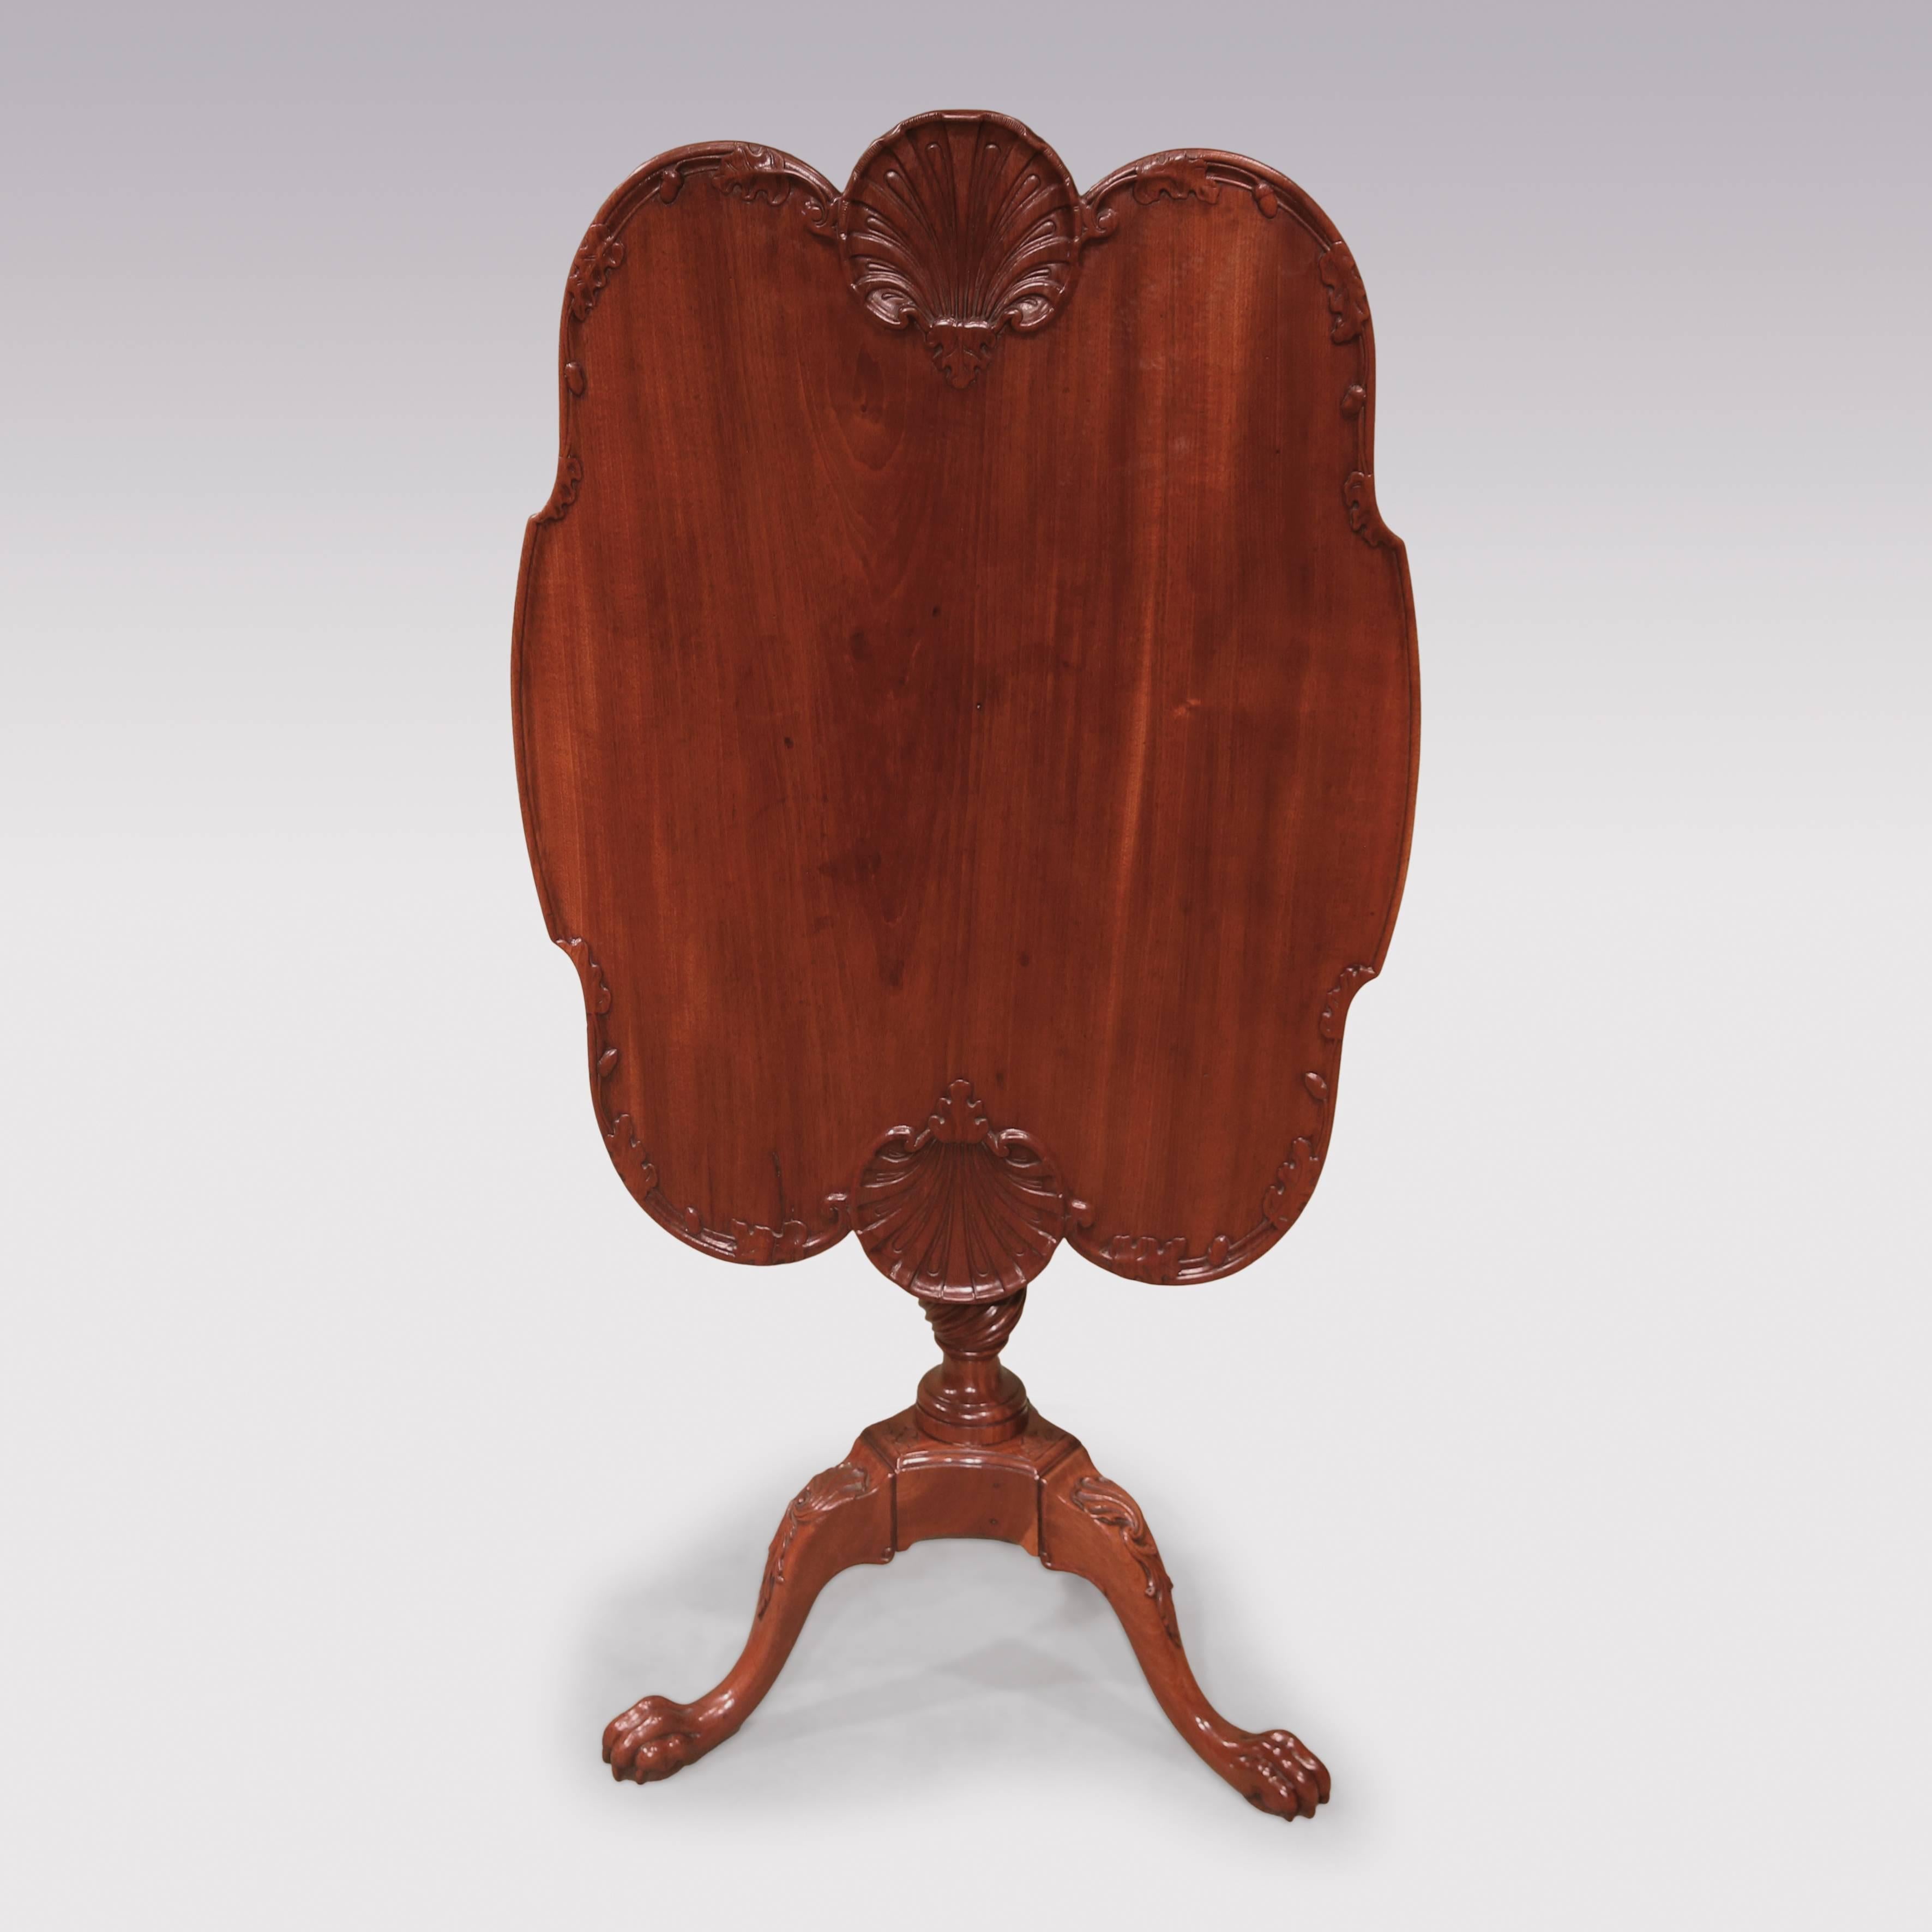 An unusual mid-18th century figured mahogany dish-top tripod table of rounded rectangular form, carved with oak leaves and acorns and scalloped shells to the sides, raised on fluted gun-barrel and spiral twist stem supported on leaf scrolled, carved